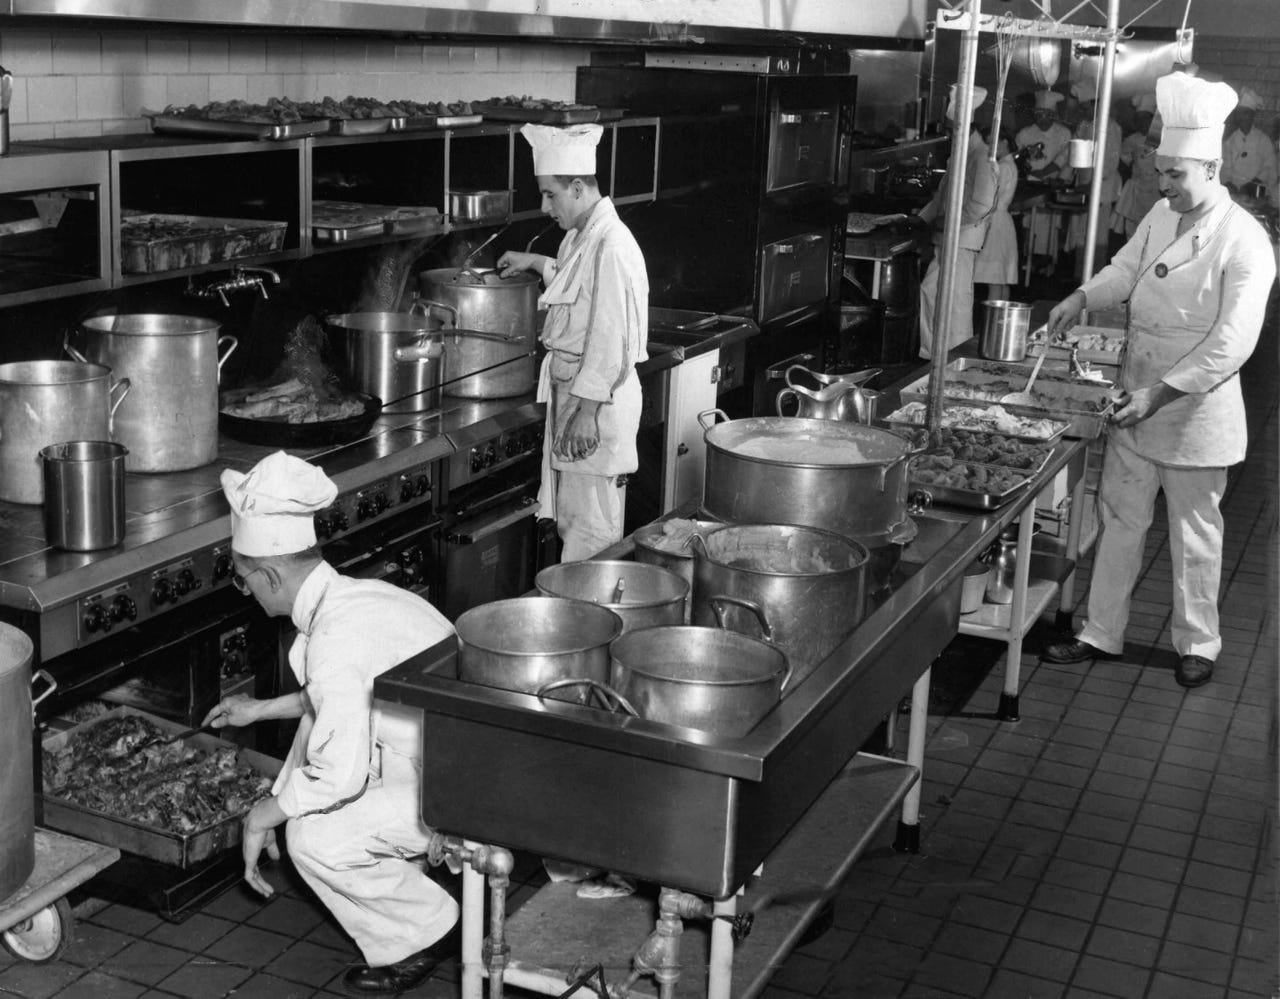 A full crew of cooks prepared meals for the cafeteria at the Ford Motor Company Willow Run Bomber plant on January 15, 1943.